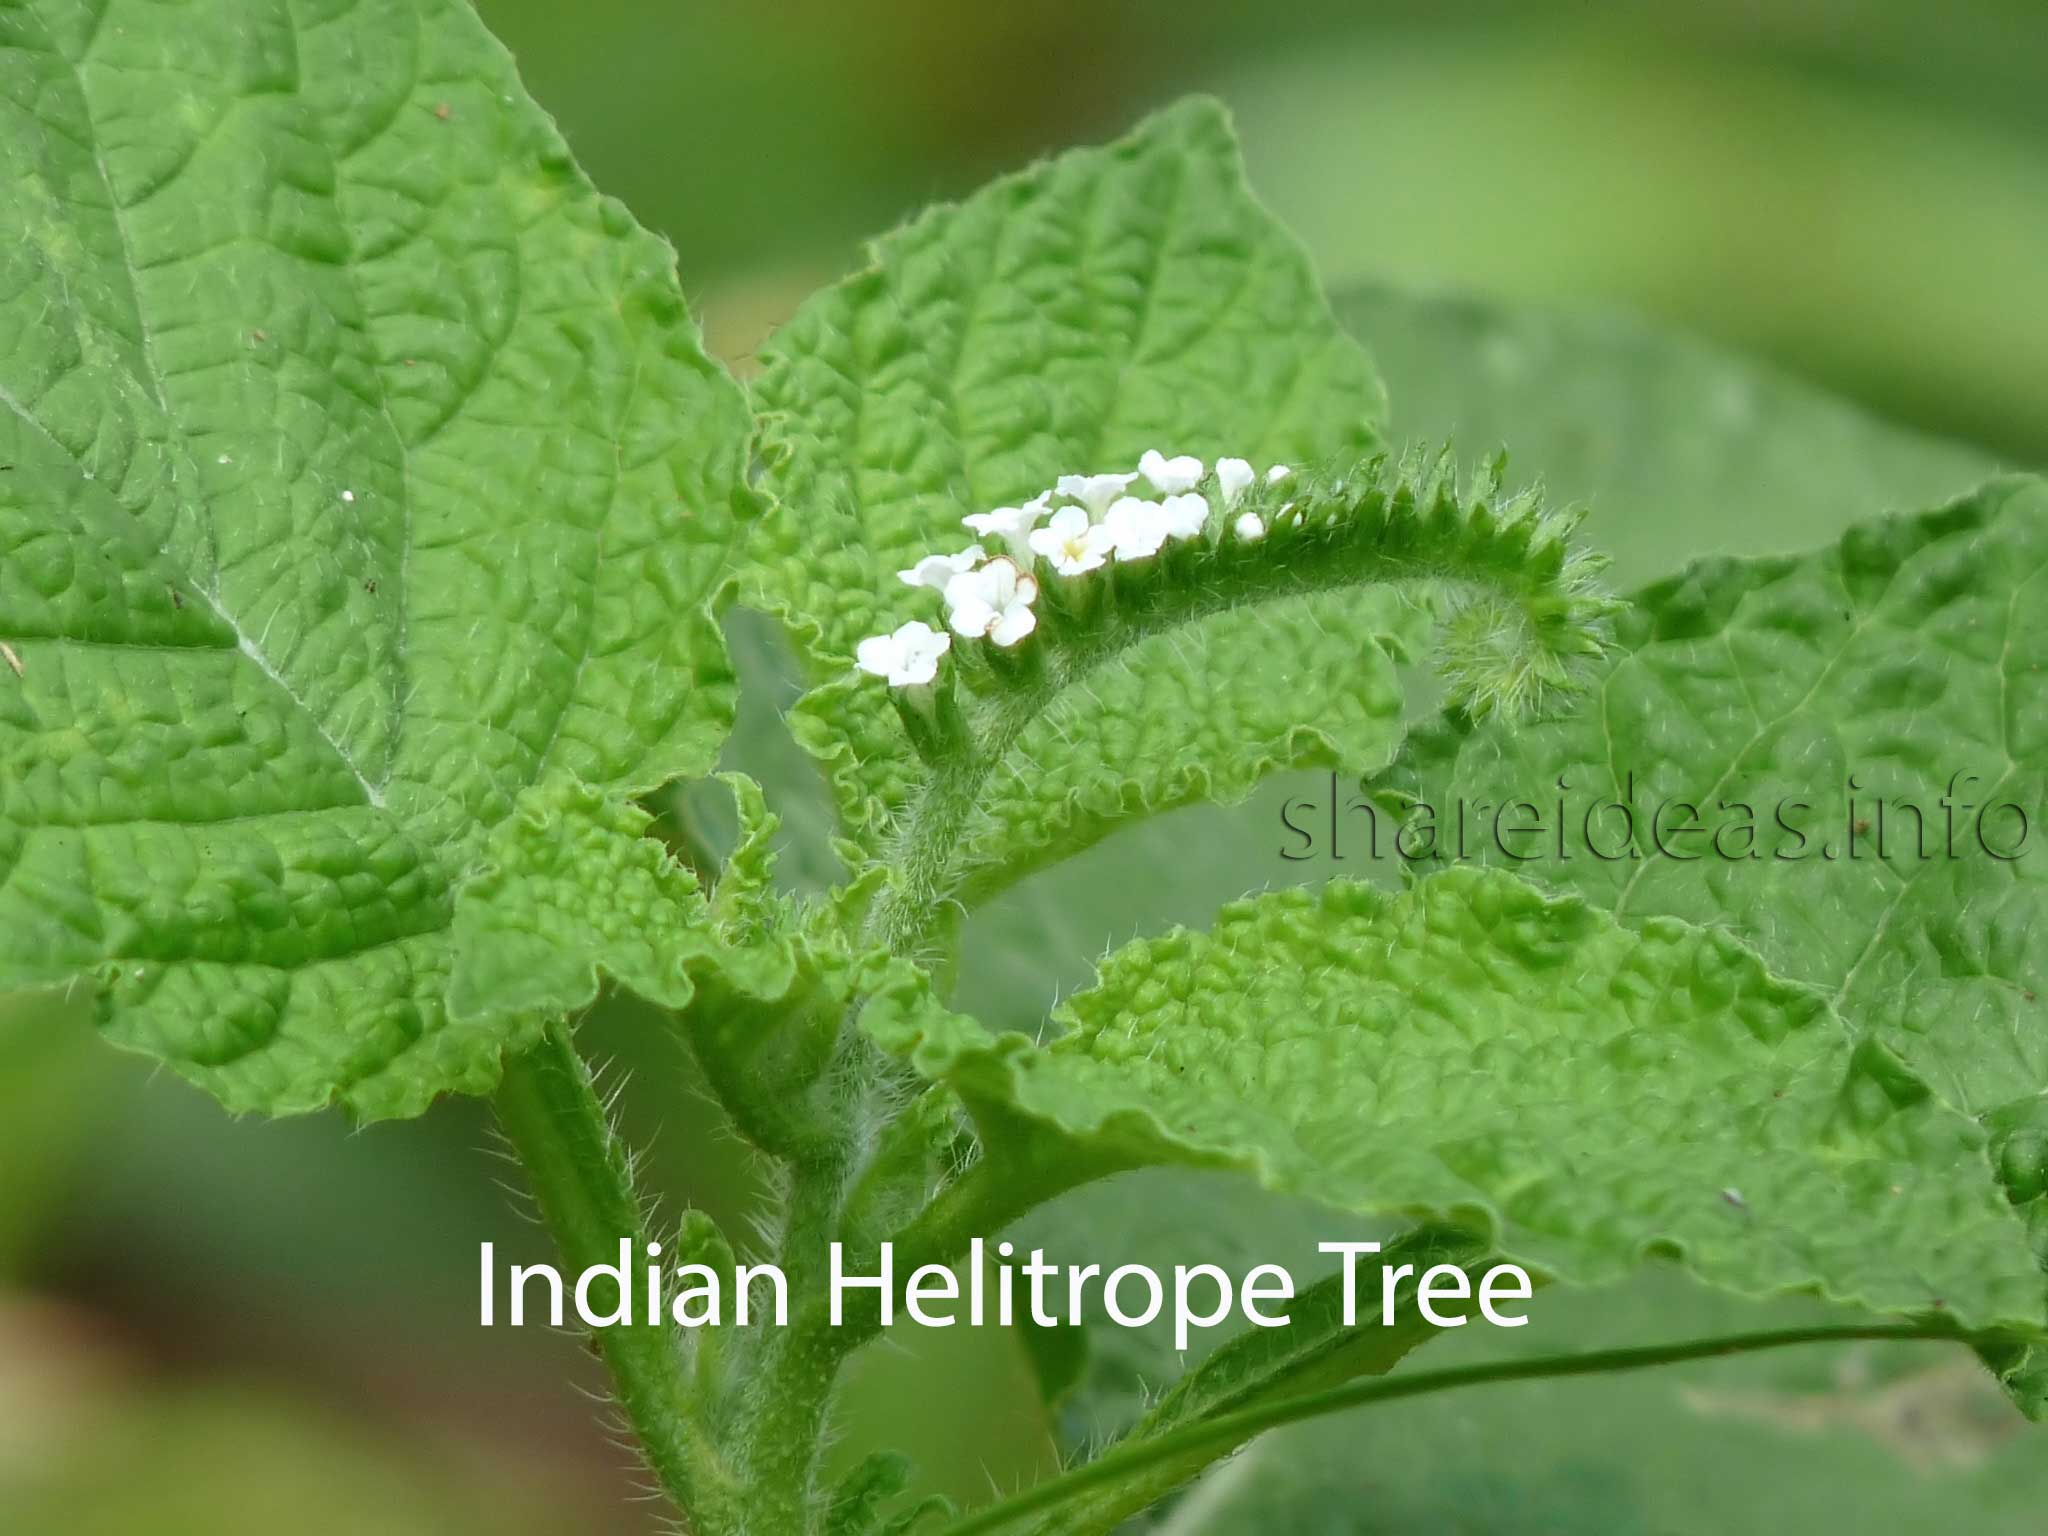 The benefits of Indian heliotrope root